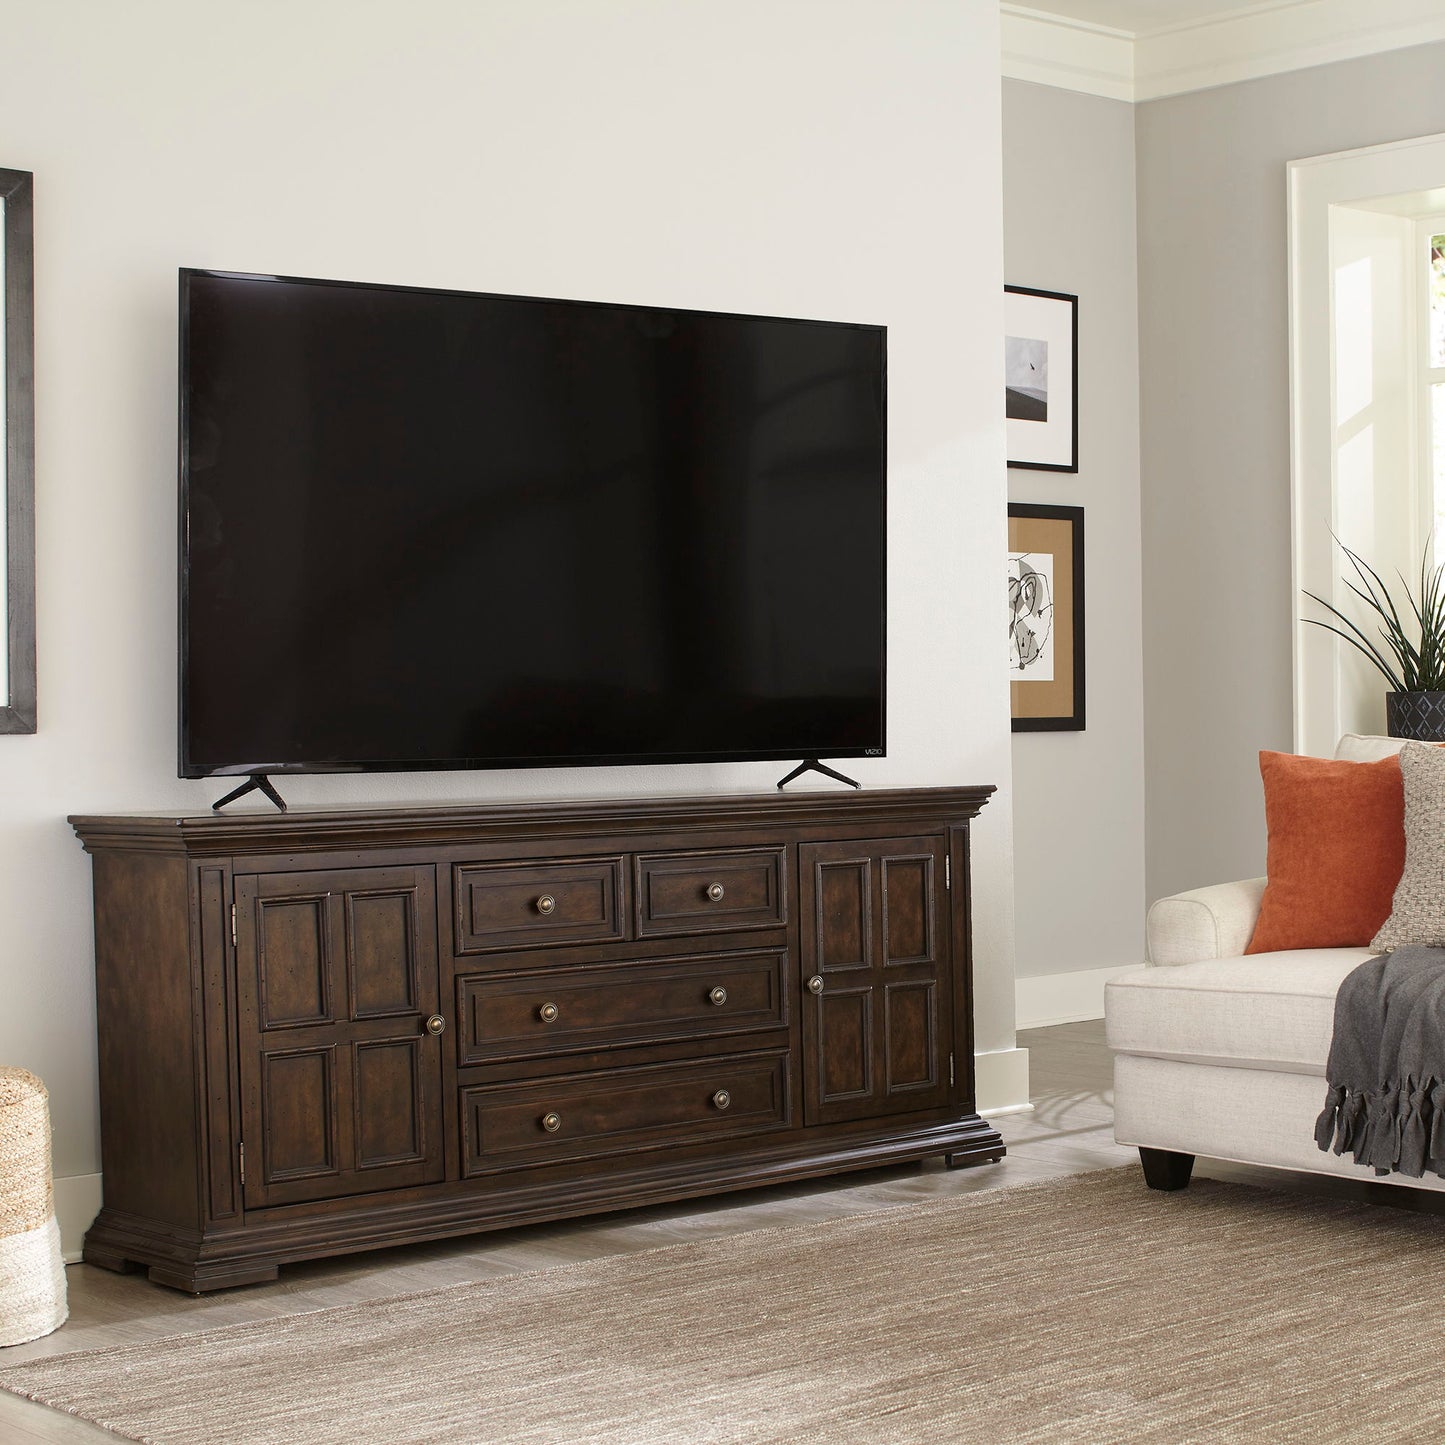 Big Valley - 76" TV Console - Light Brown